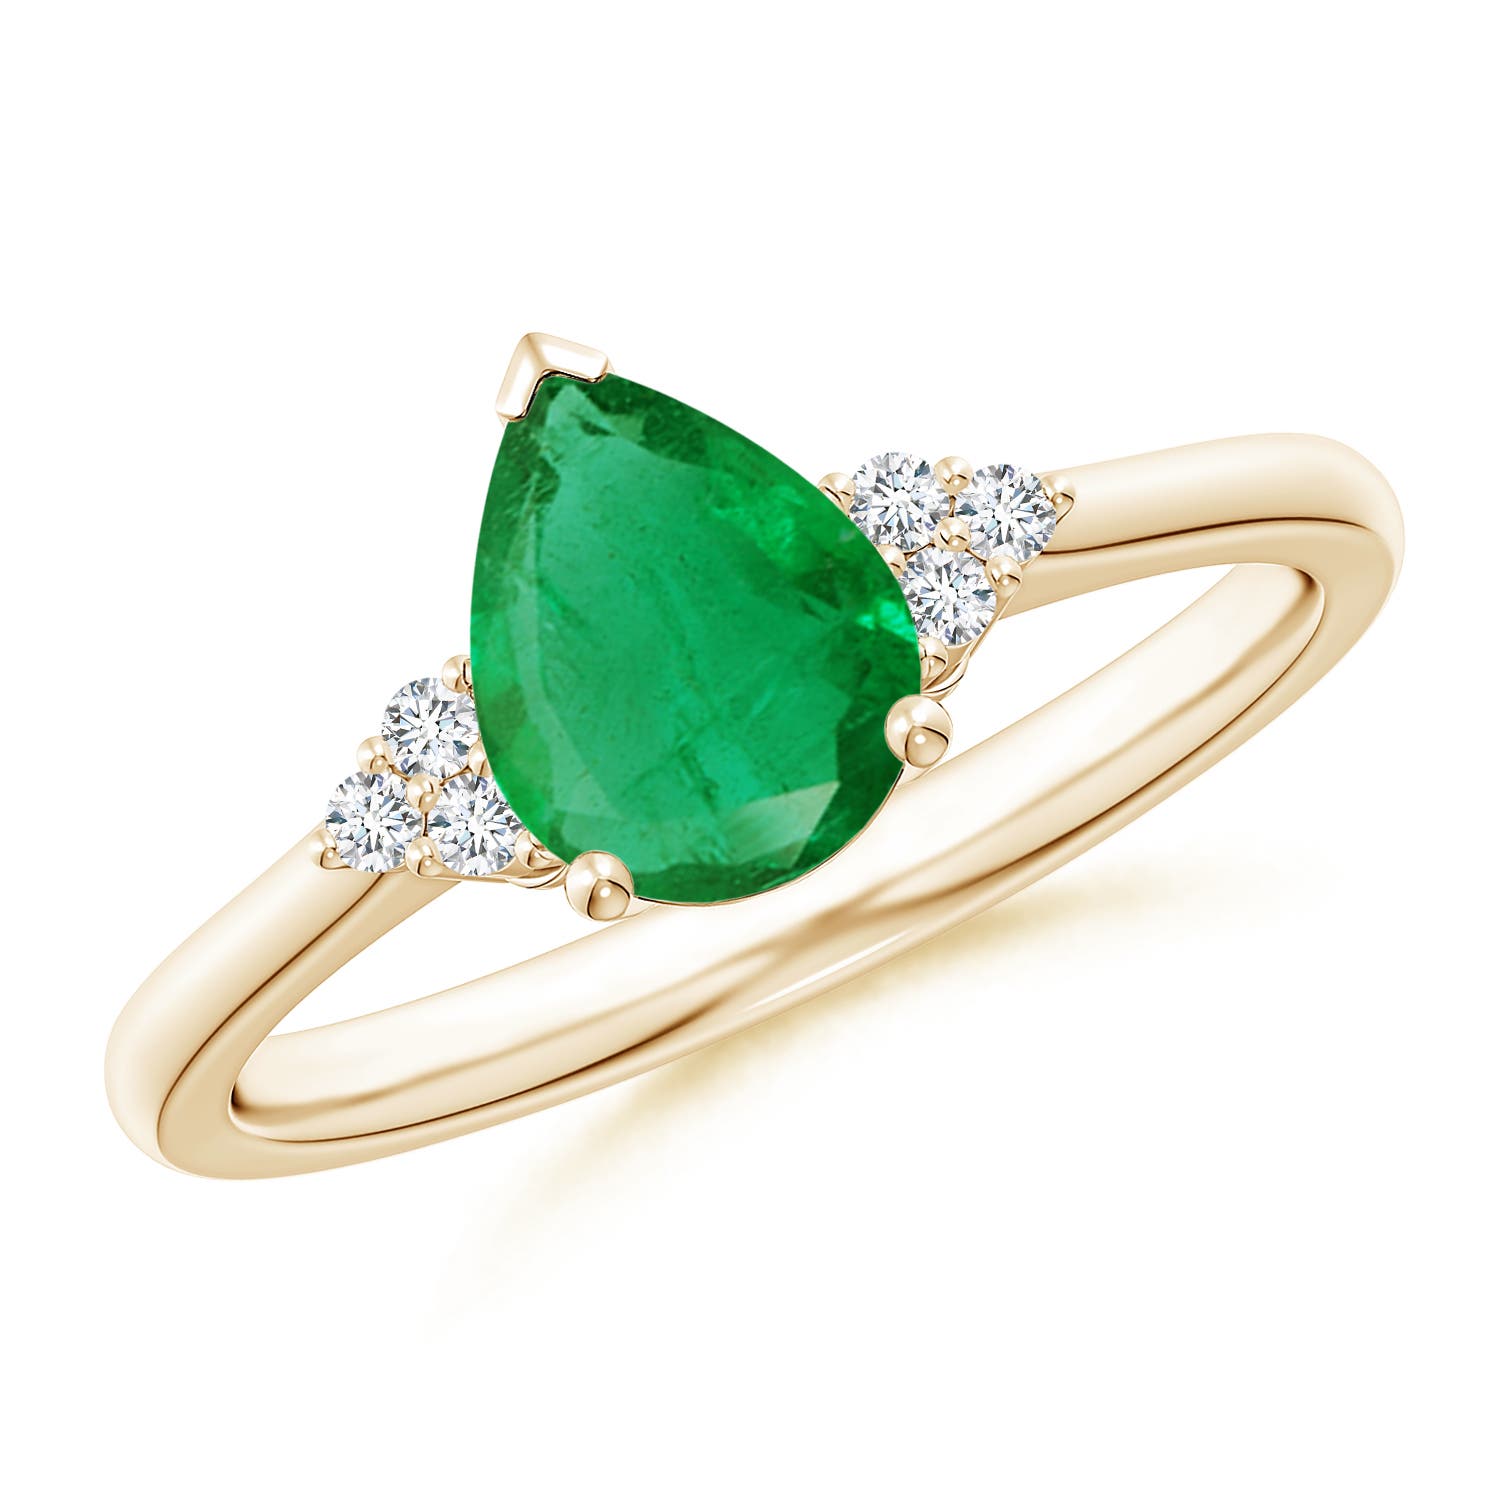 AA - Emerald / 1.02 CT / 14 KT Yellow Gold